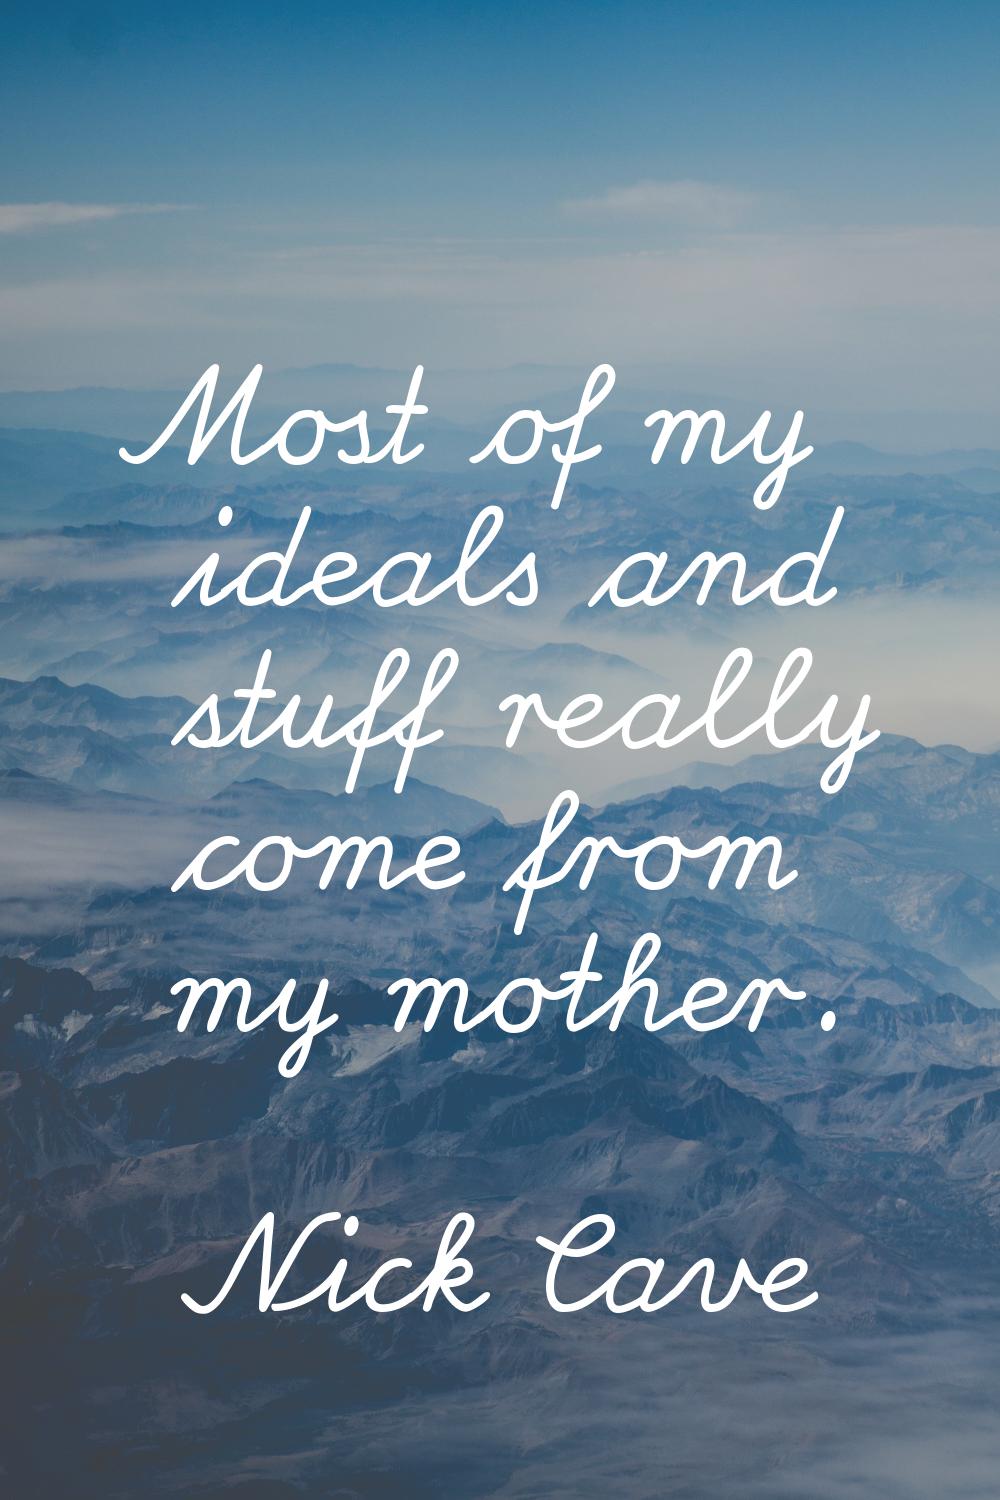 Most of my ideals and stuff really come from my mother.